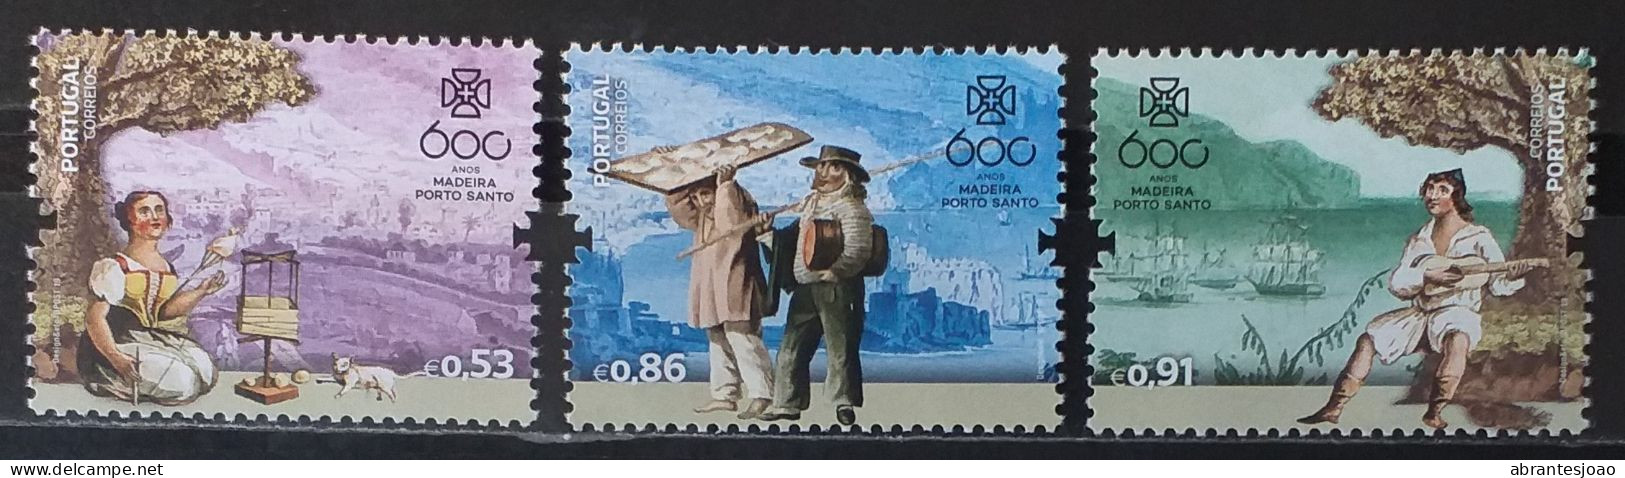 2019 - Portugal - MNH - 600 Years Since Discovery Of Madeira - 3 Stamps - Ongebruikt